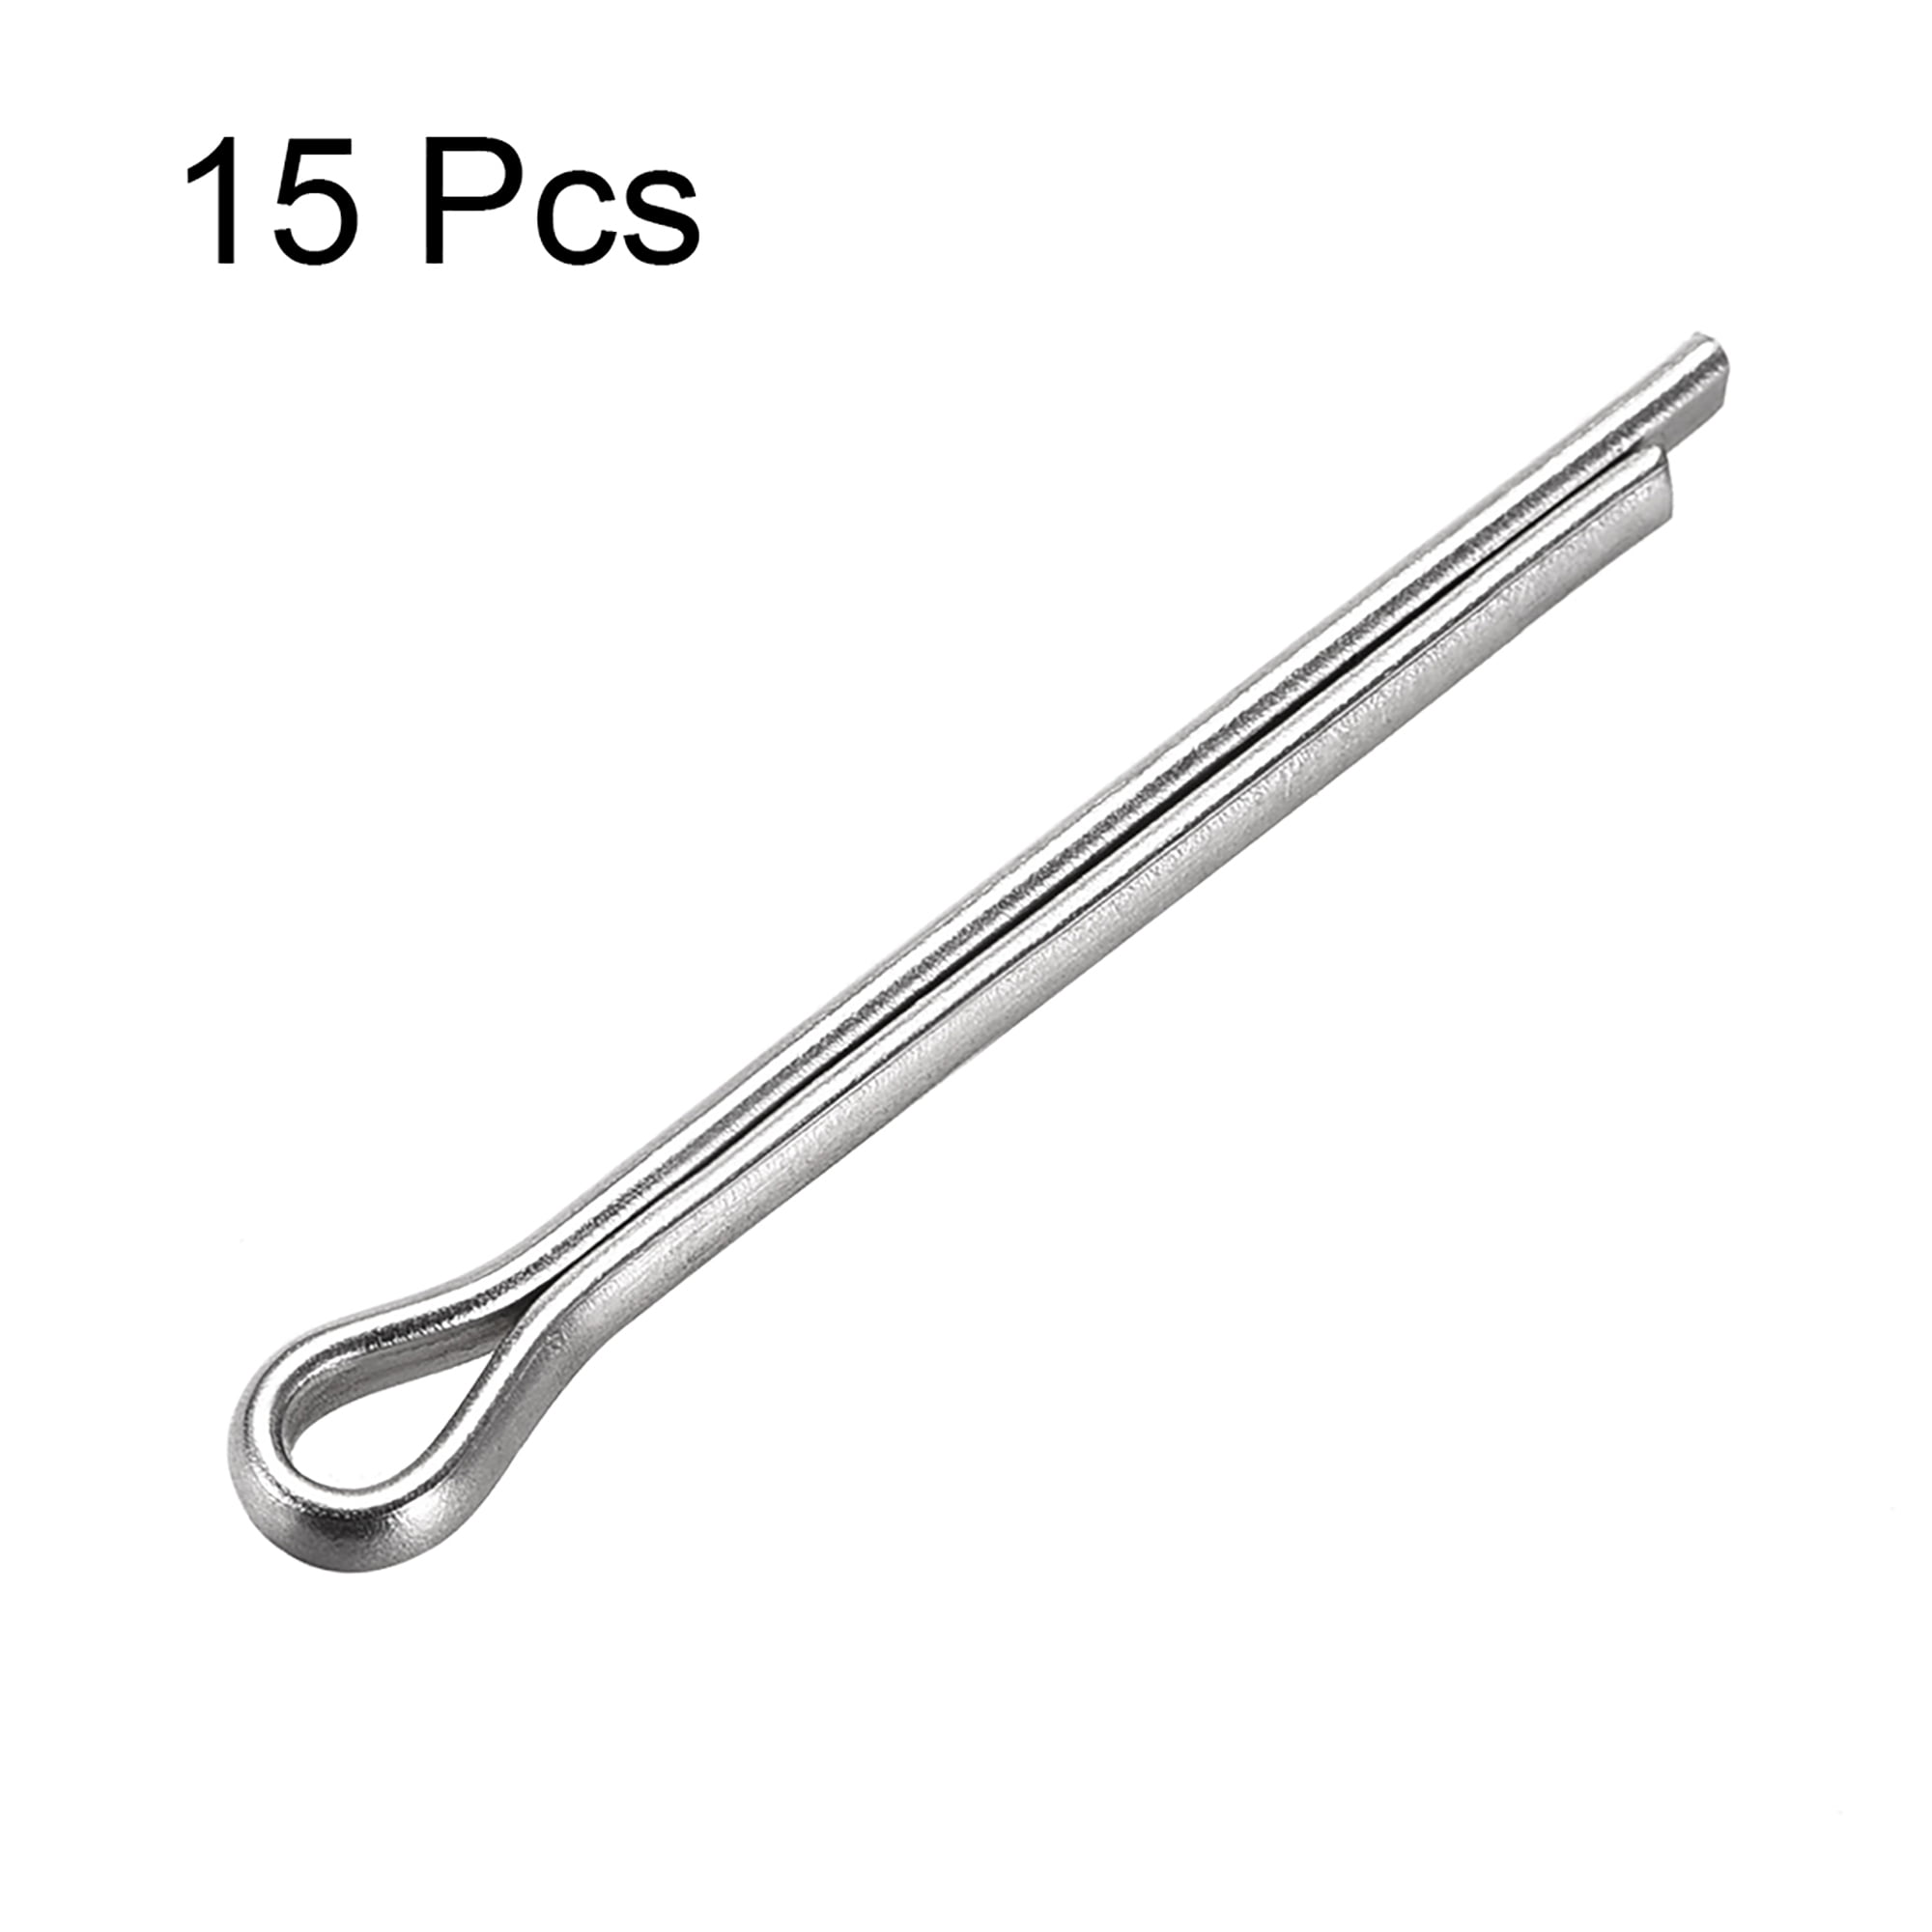 4mm x 40mm 304 Stainless Steel 2-Prongs Silver Tone 5Pcs Split Cotter Pin